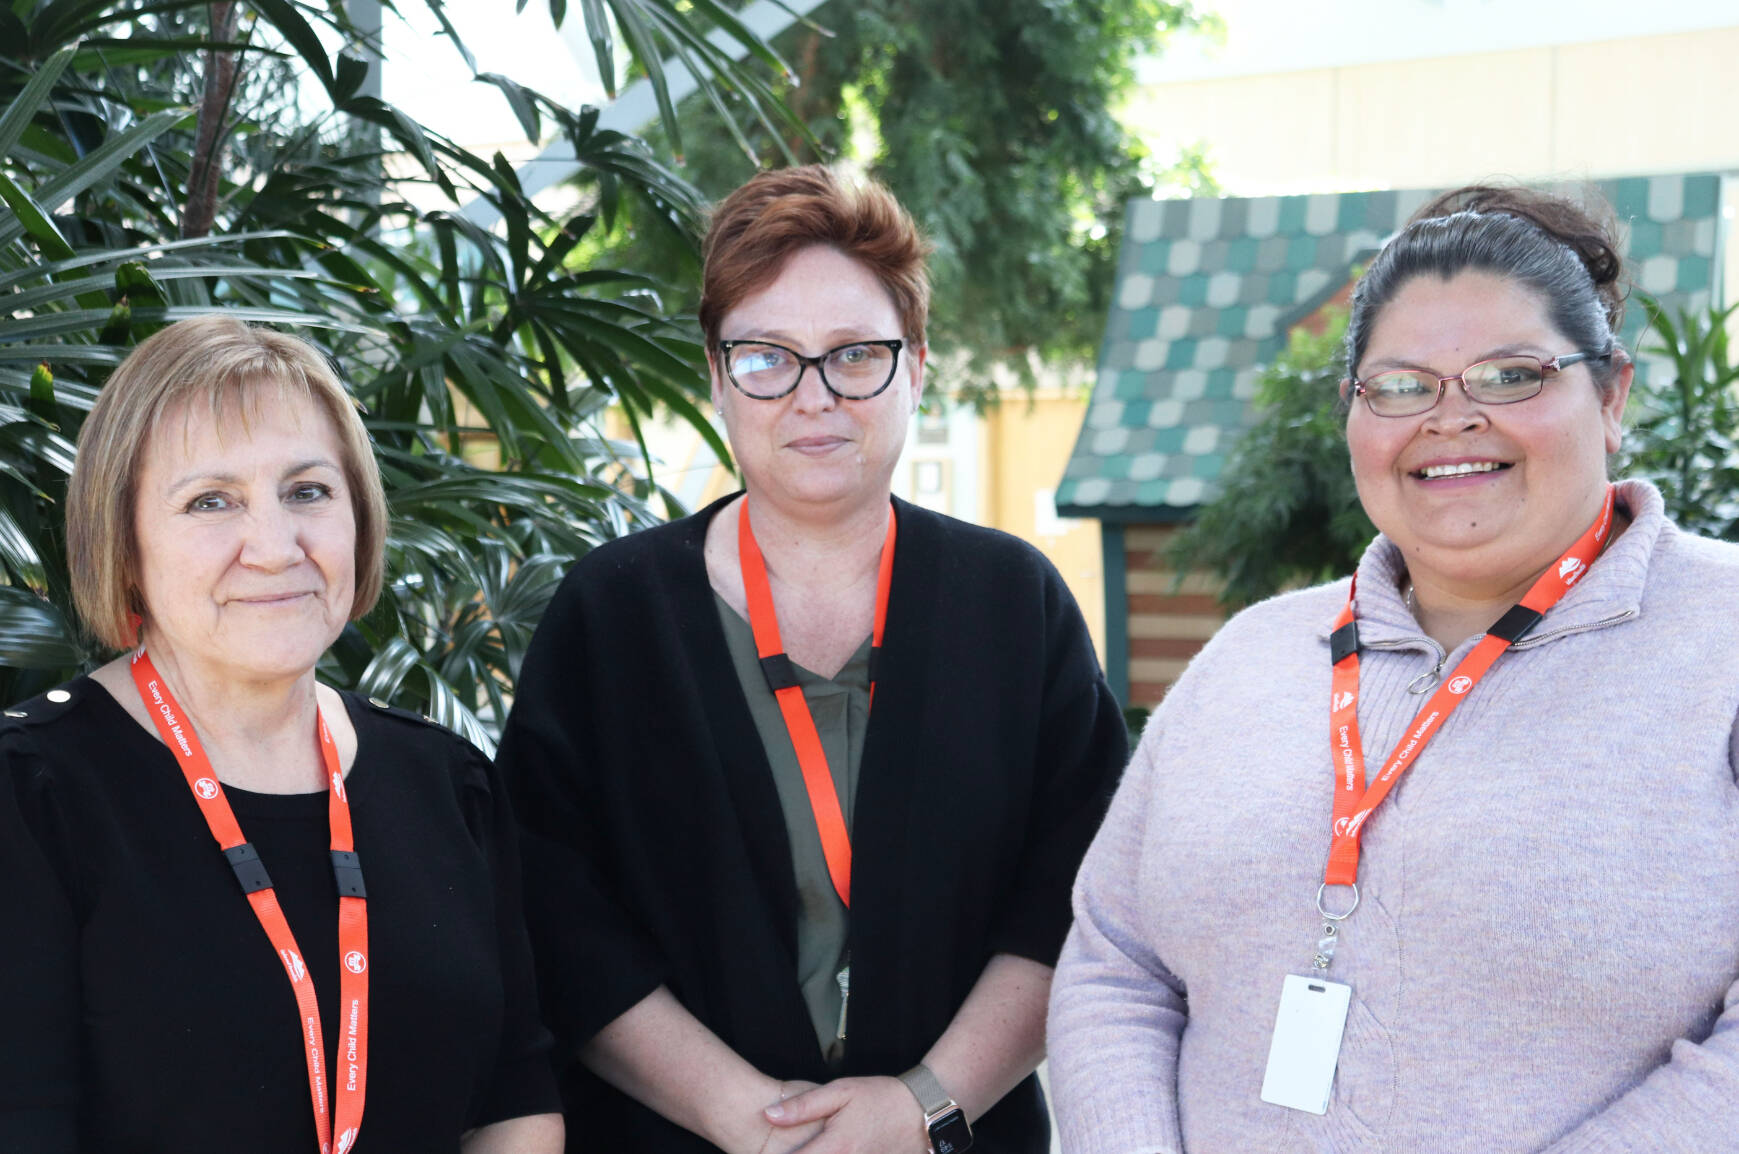 Nurses Deb Melvin, who is an Indigenous patient navigator, Indigenous Health Manager Jess McConnell and Indigenous Liaison Nurse Amanda Watts work at the West Coast General Hospital. (Alexandra Mehl photo)